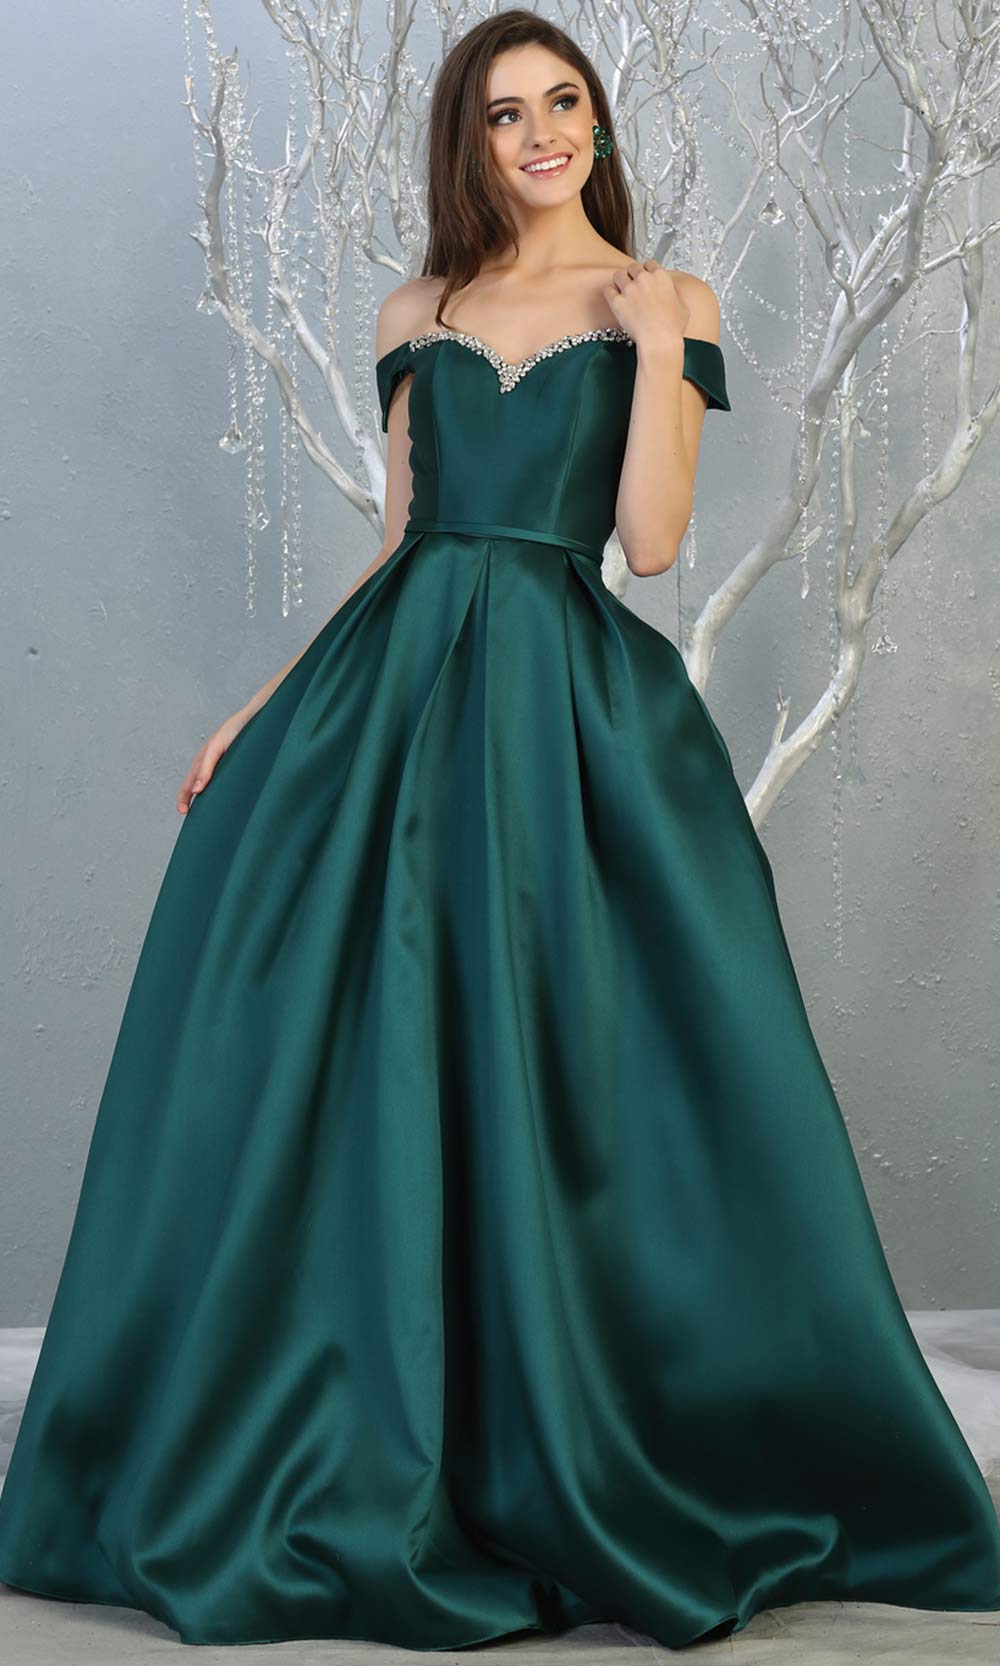 Mayqueen MQ 1784 long hunter green off shoulder evening flowy dress. Full length dark green satin taffeta gown is perfect for  enagagement/e-shoot dress, formal wedding guest, indowestern gown, evening party dress, prom, bridesmaid. Plus sizes avail.jpg